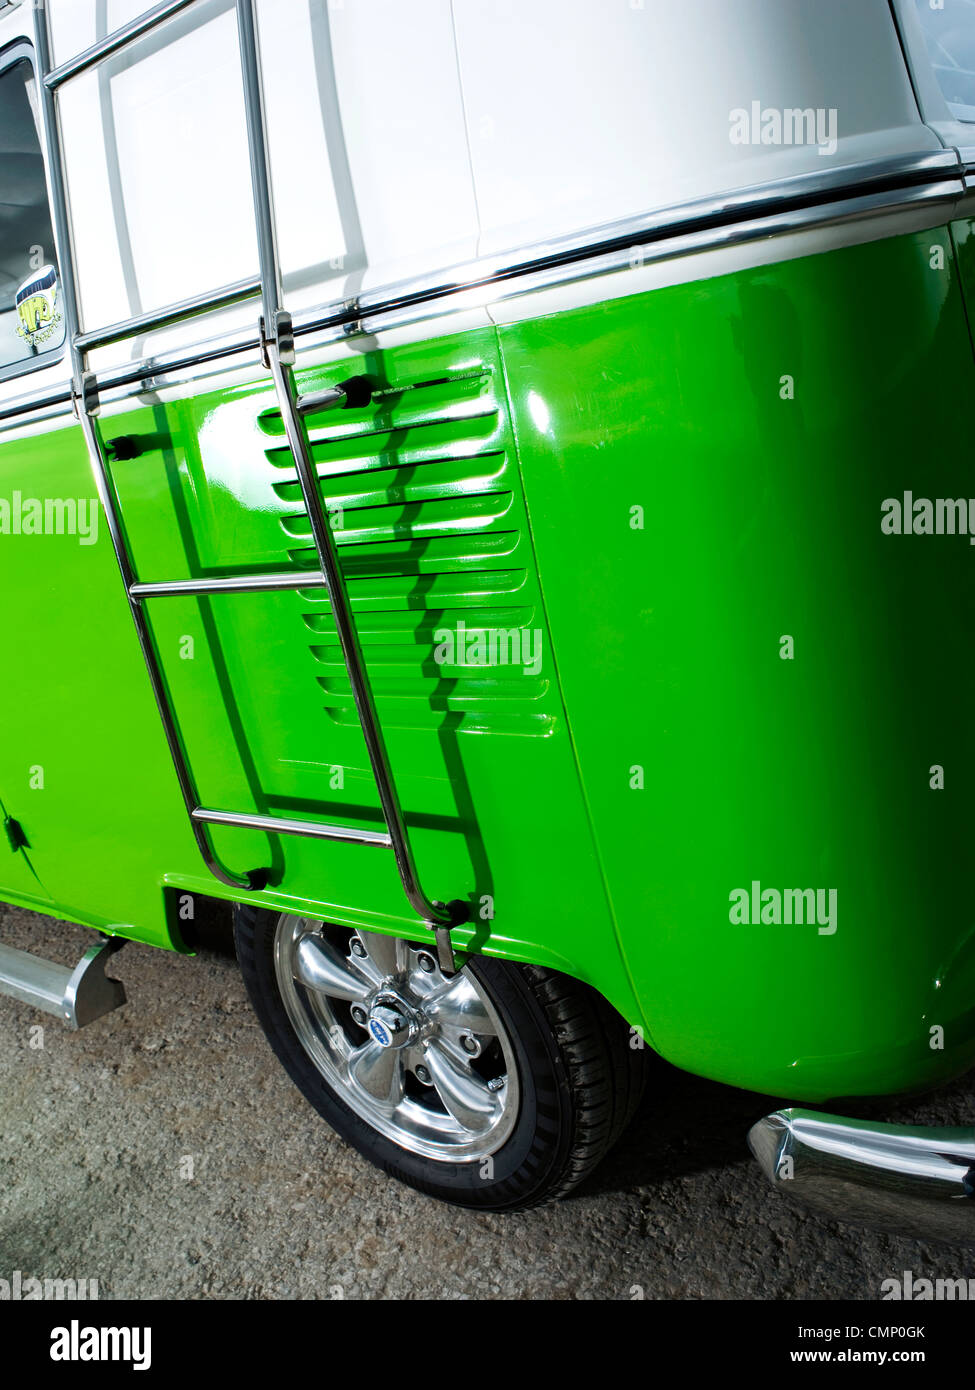 green vw volkswagen split screen camper van bus lowered modified pimped lime hippie hippy 1960s 1950s aircooled retro detail Stock Photo